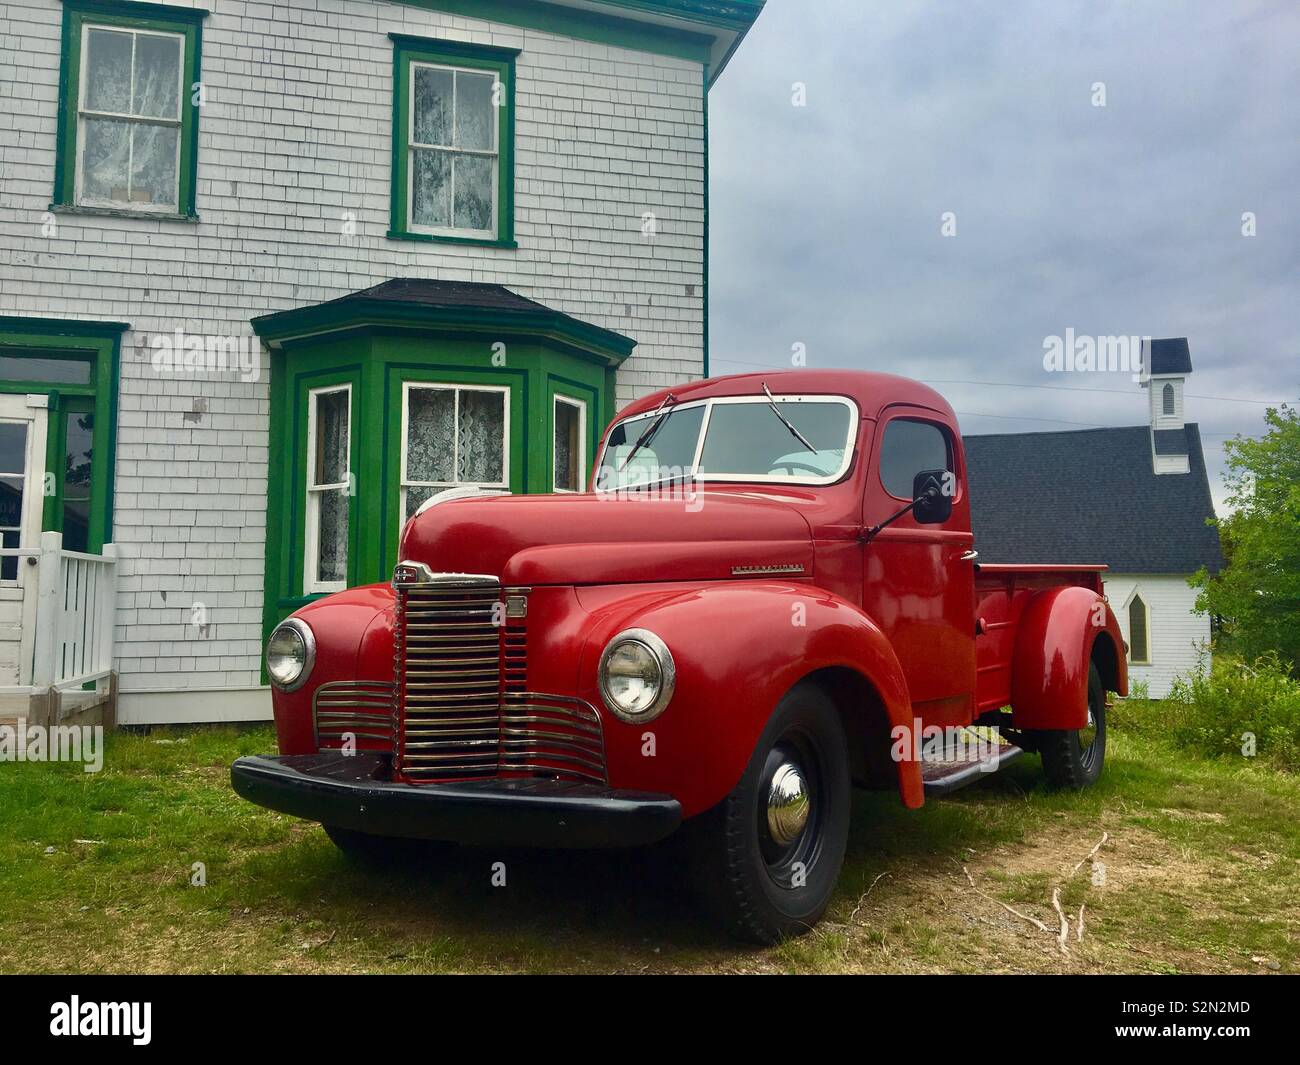 International 1940’s red pick up truck Stock Photo